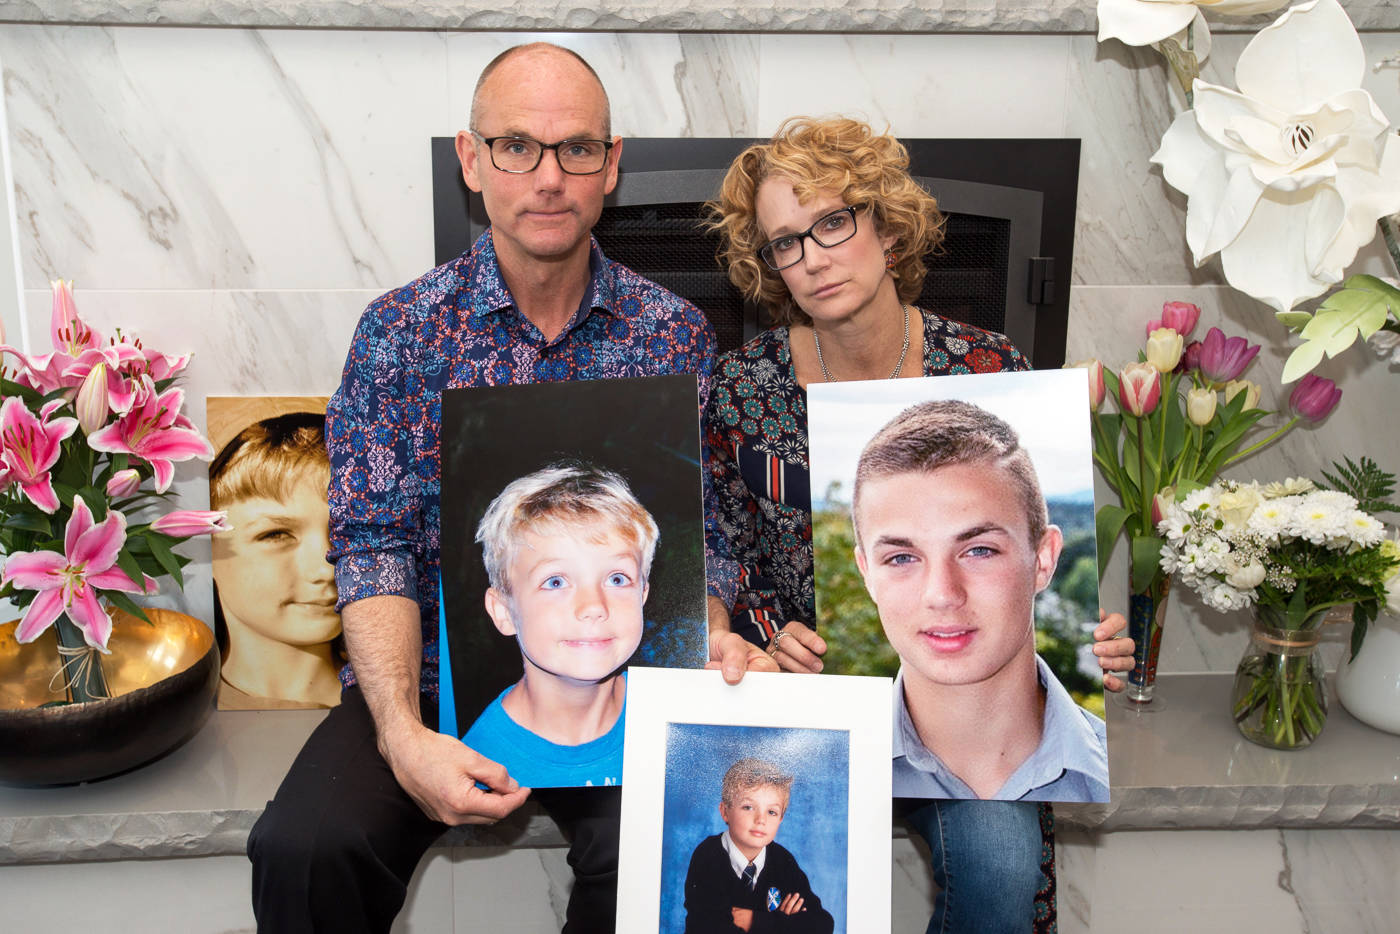 Brock Eurchuk and Rachel Staples, whose son Elliot Eurchuk died from an accidental overdose Friday in his Oak Bay home, call for changes to the laws governing youth health care. (Keri Coles/Oak Bay News)